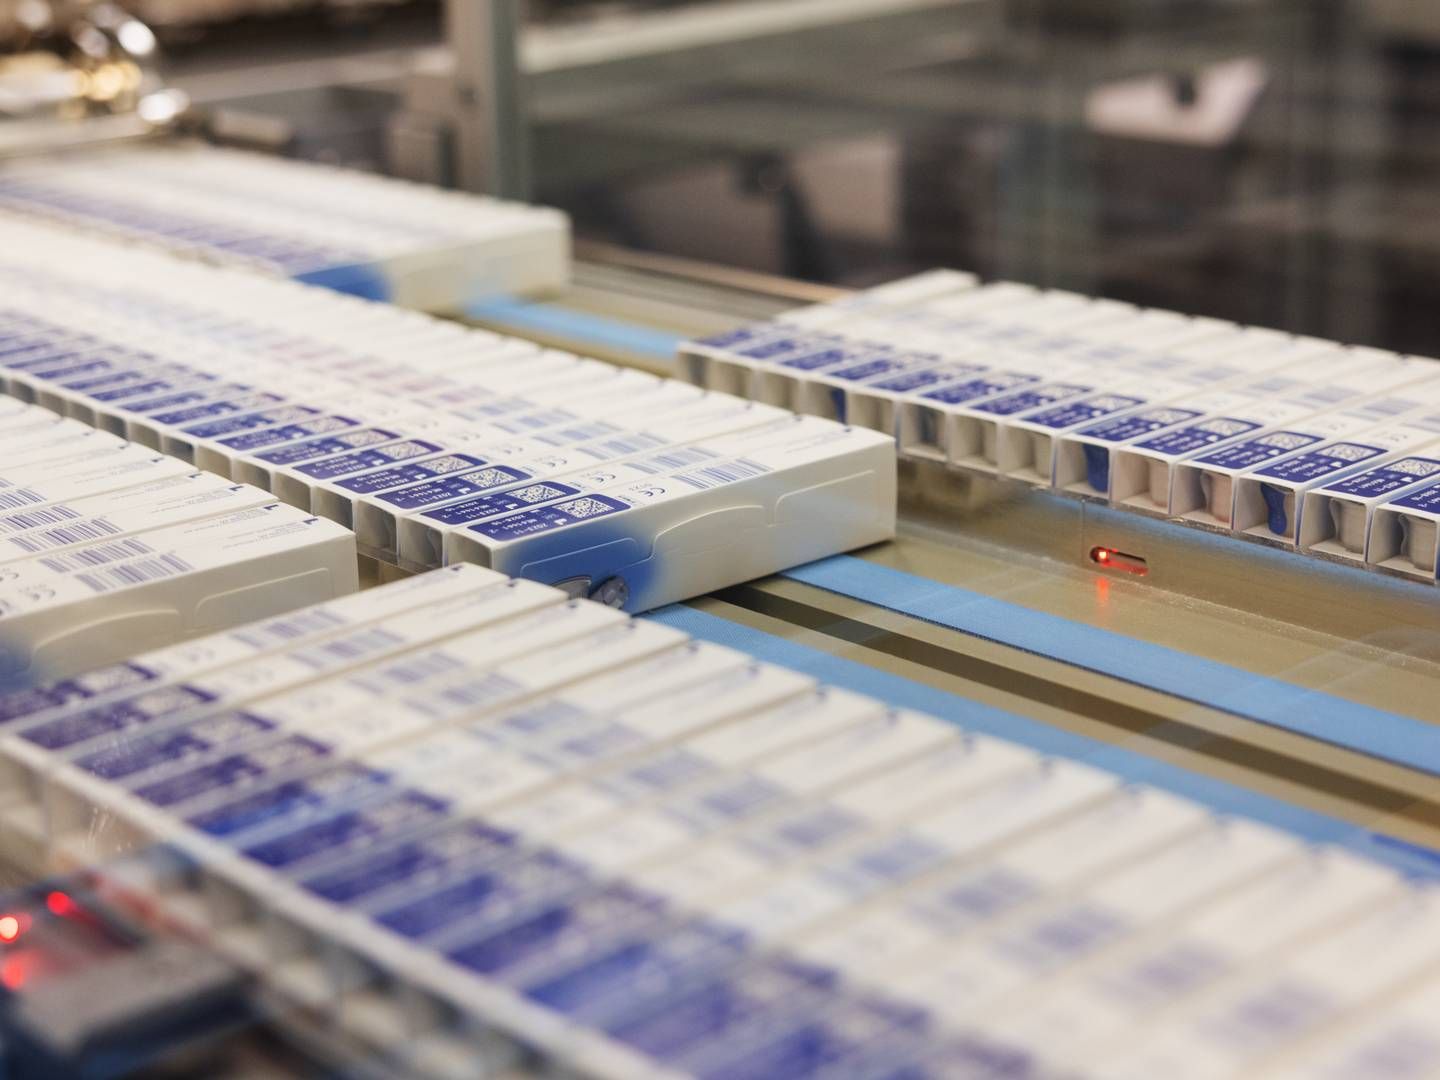 Novo Nordisk does not have enough capacity to meet the demand for its products. | Photo: Gregers Tycho